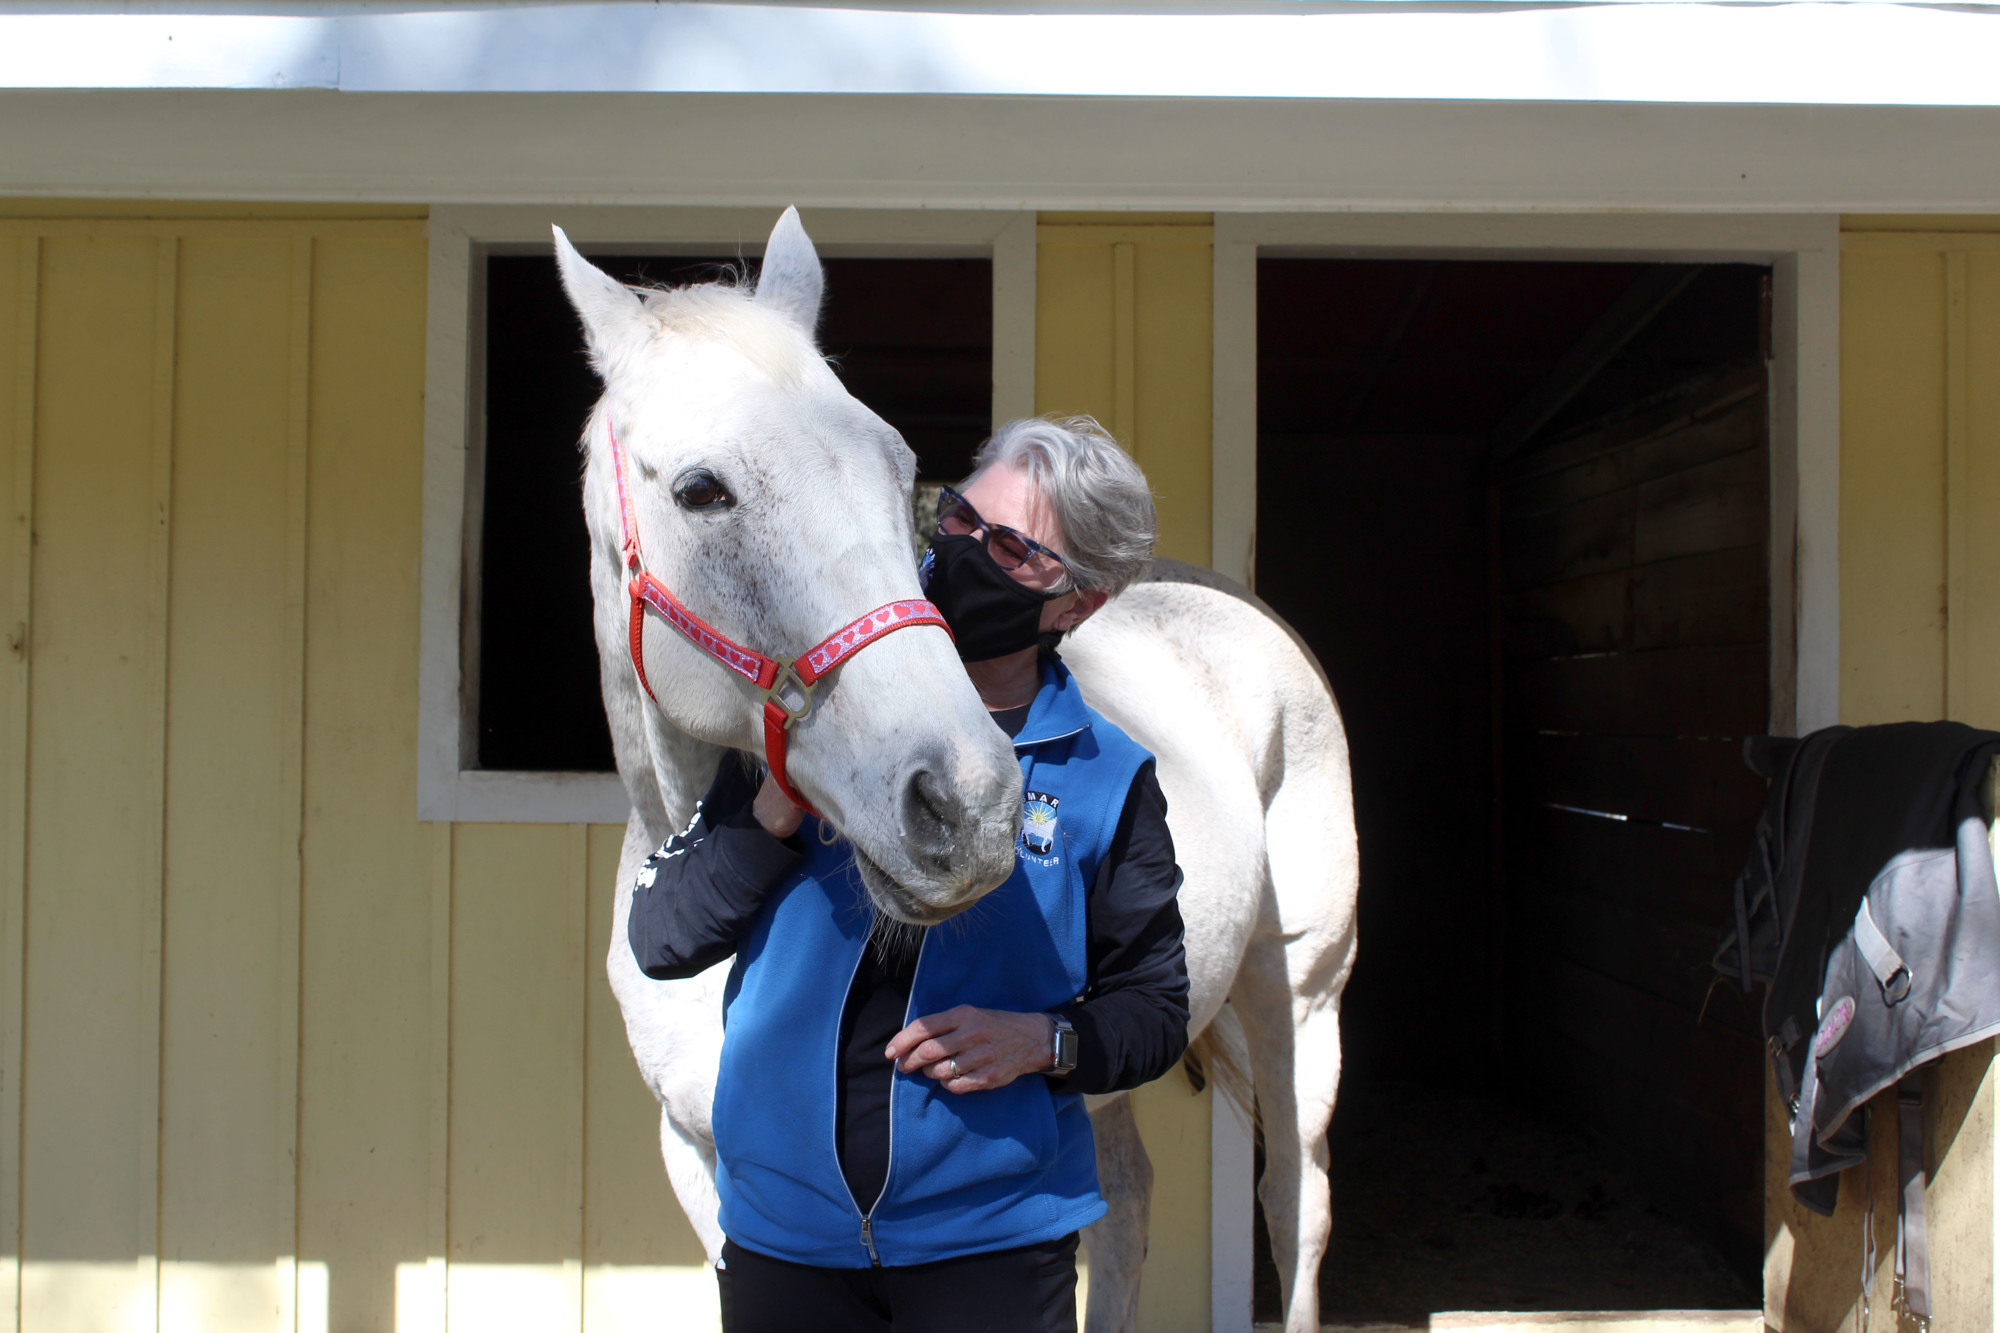 Terri Arnold, a volunteer coordinator of SMART, said horses are nonjudgmental and can help clients with anxiety.